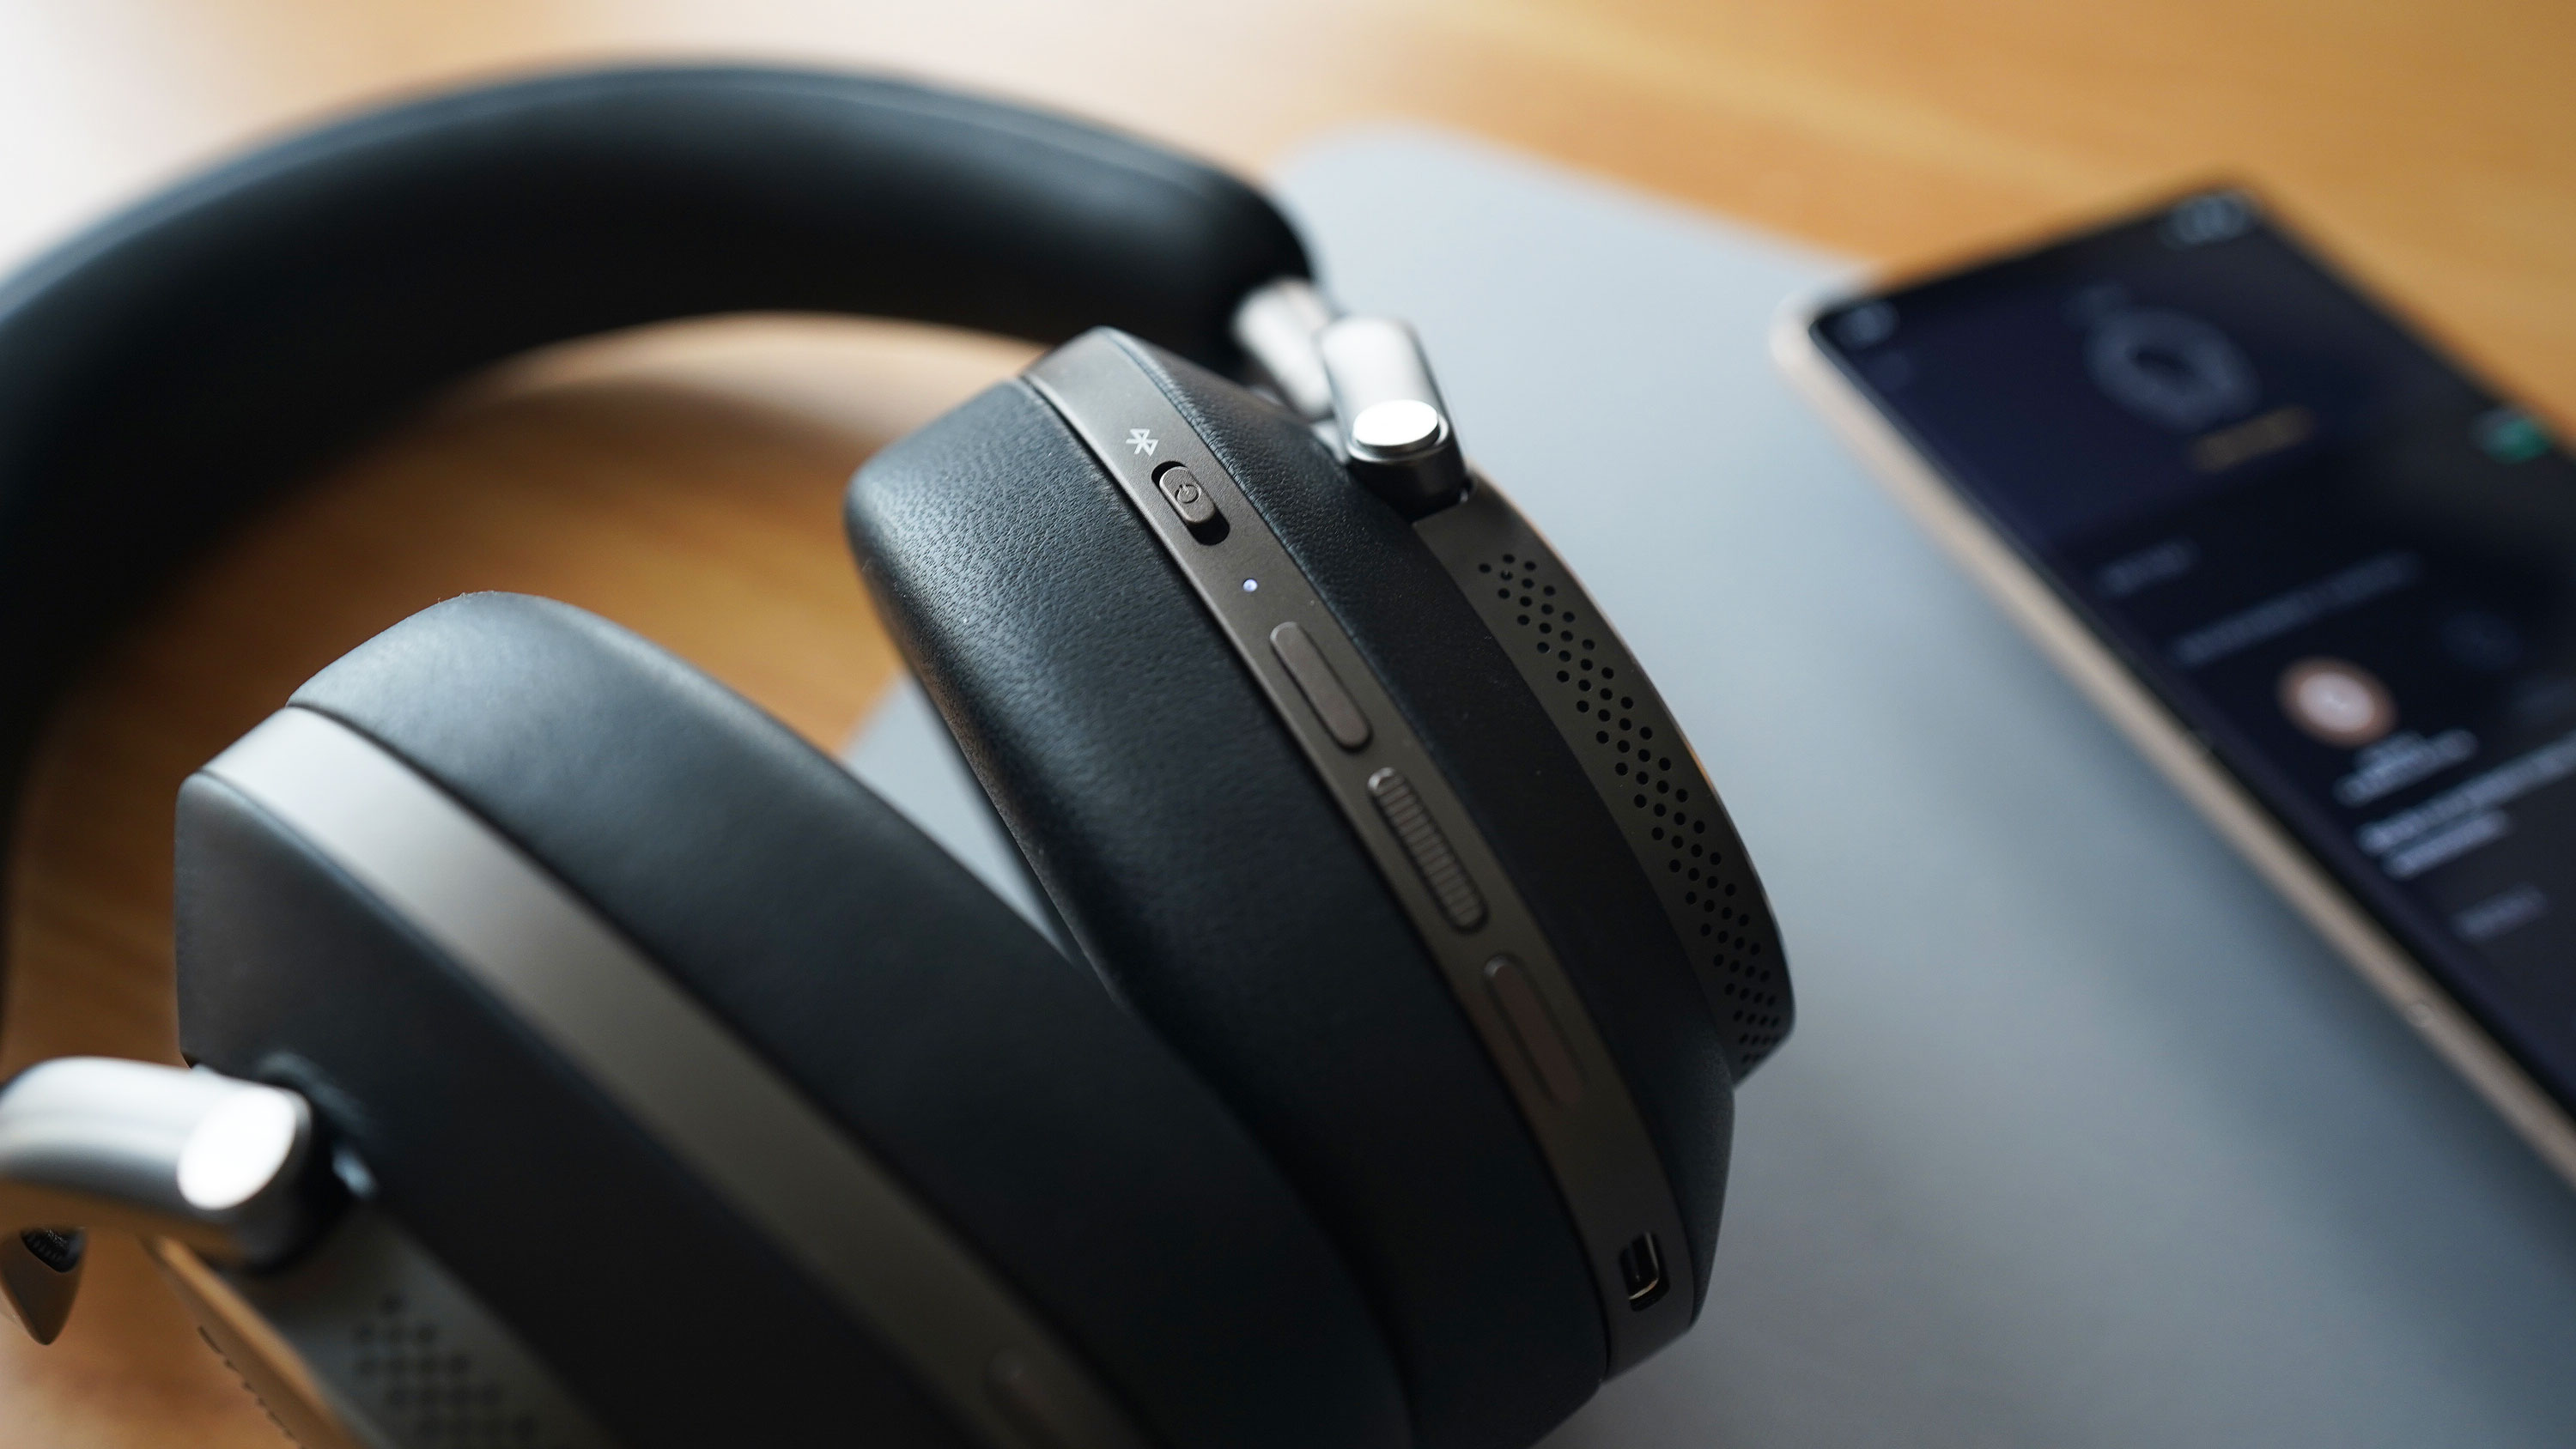 Hear them out: Bowers & Wilkins is not overcharging for these